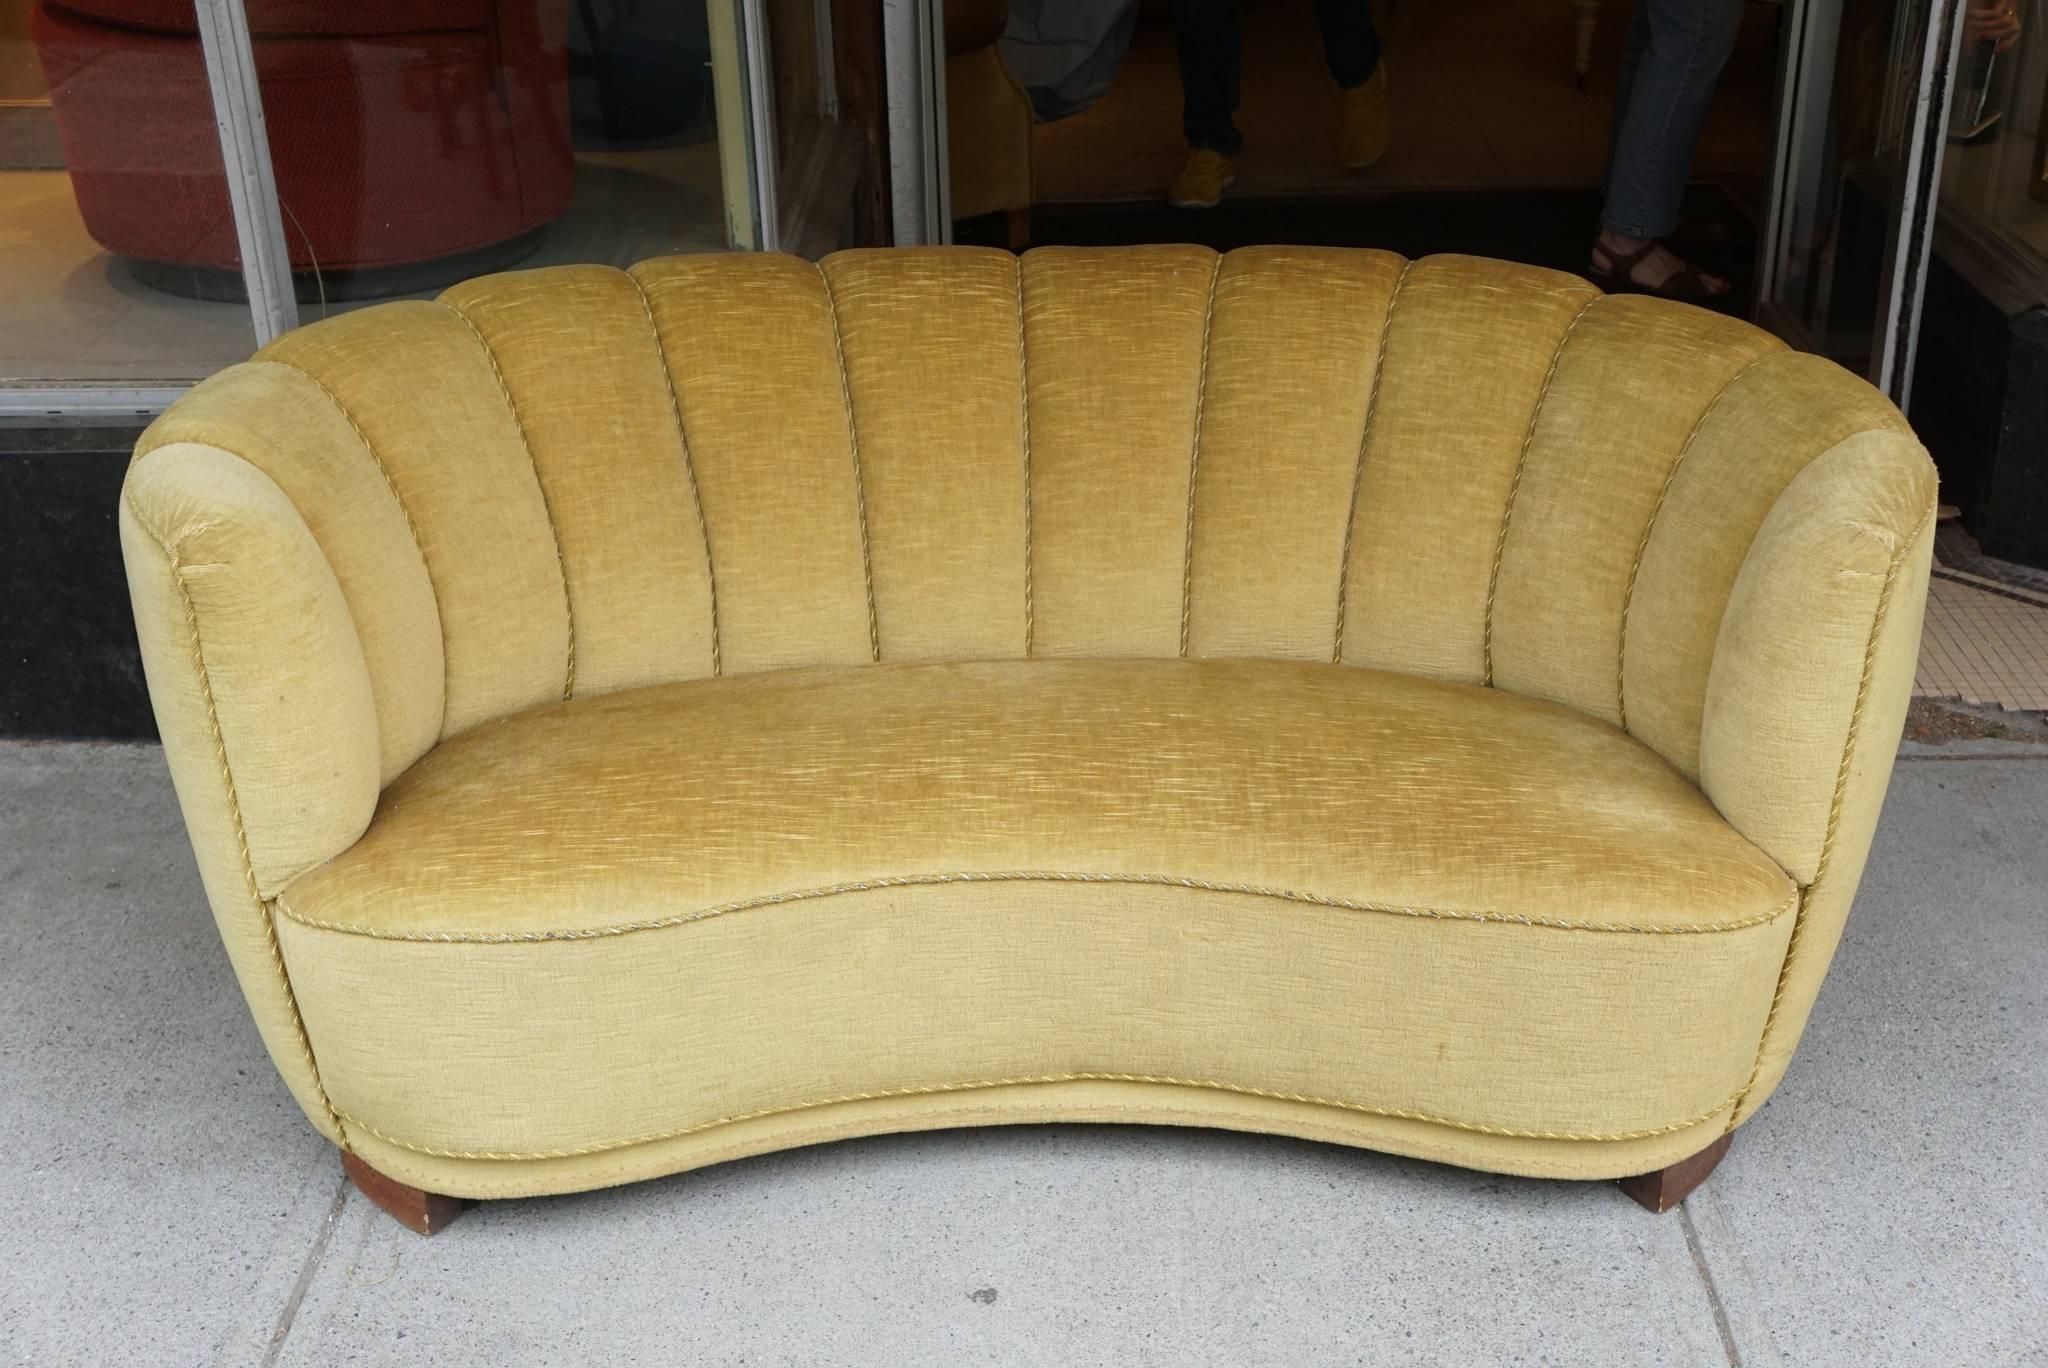 Danish Mid-Century Modern banana form sofa covered in gold mohair from Slagelse Møbelvaerk with channelled back and beech legs. Very comfortable.